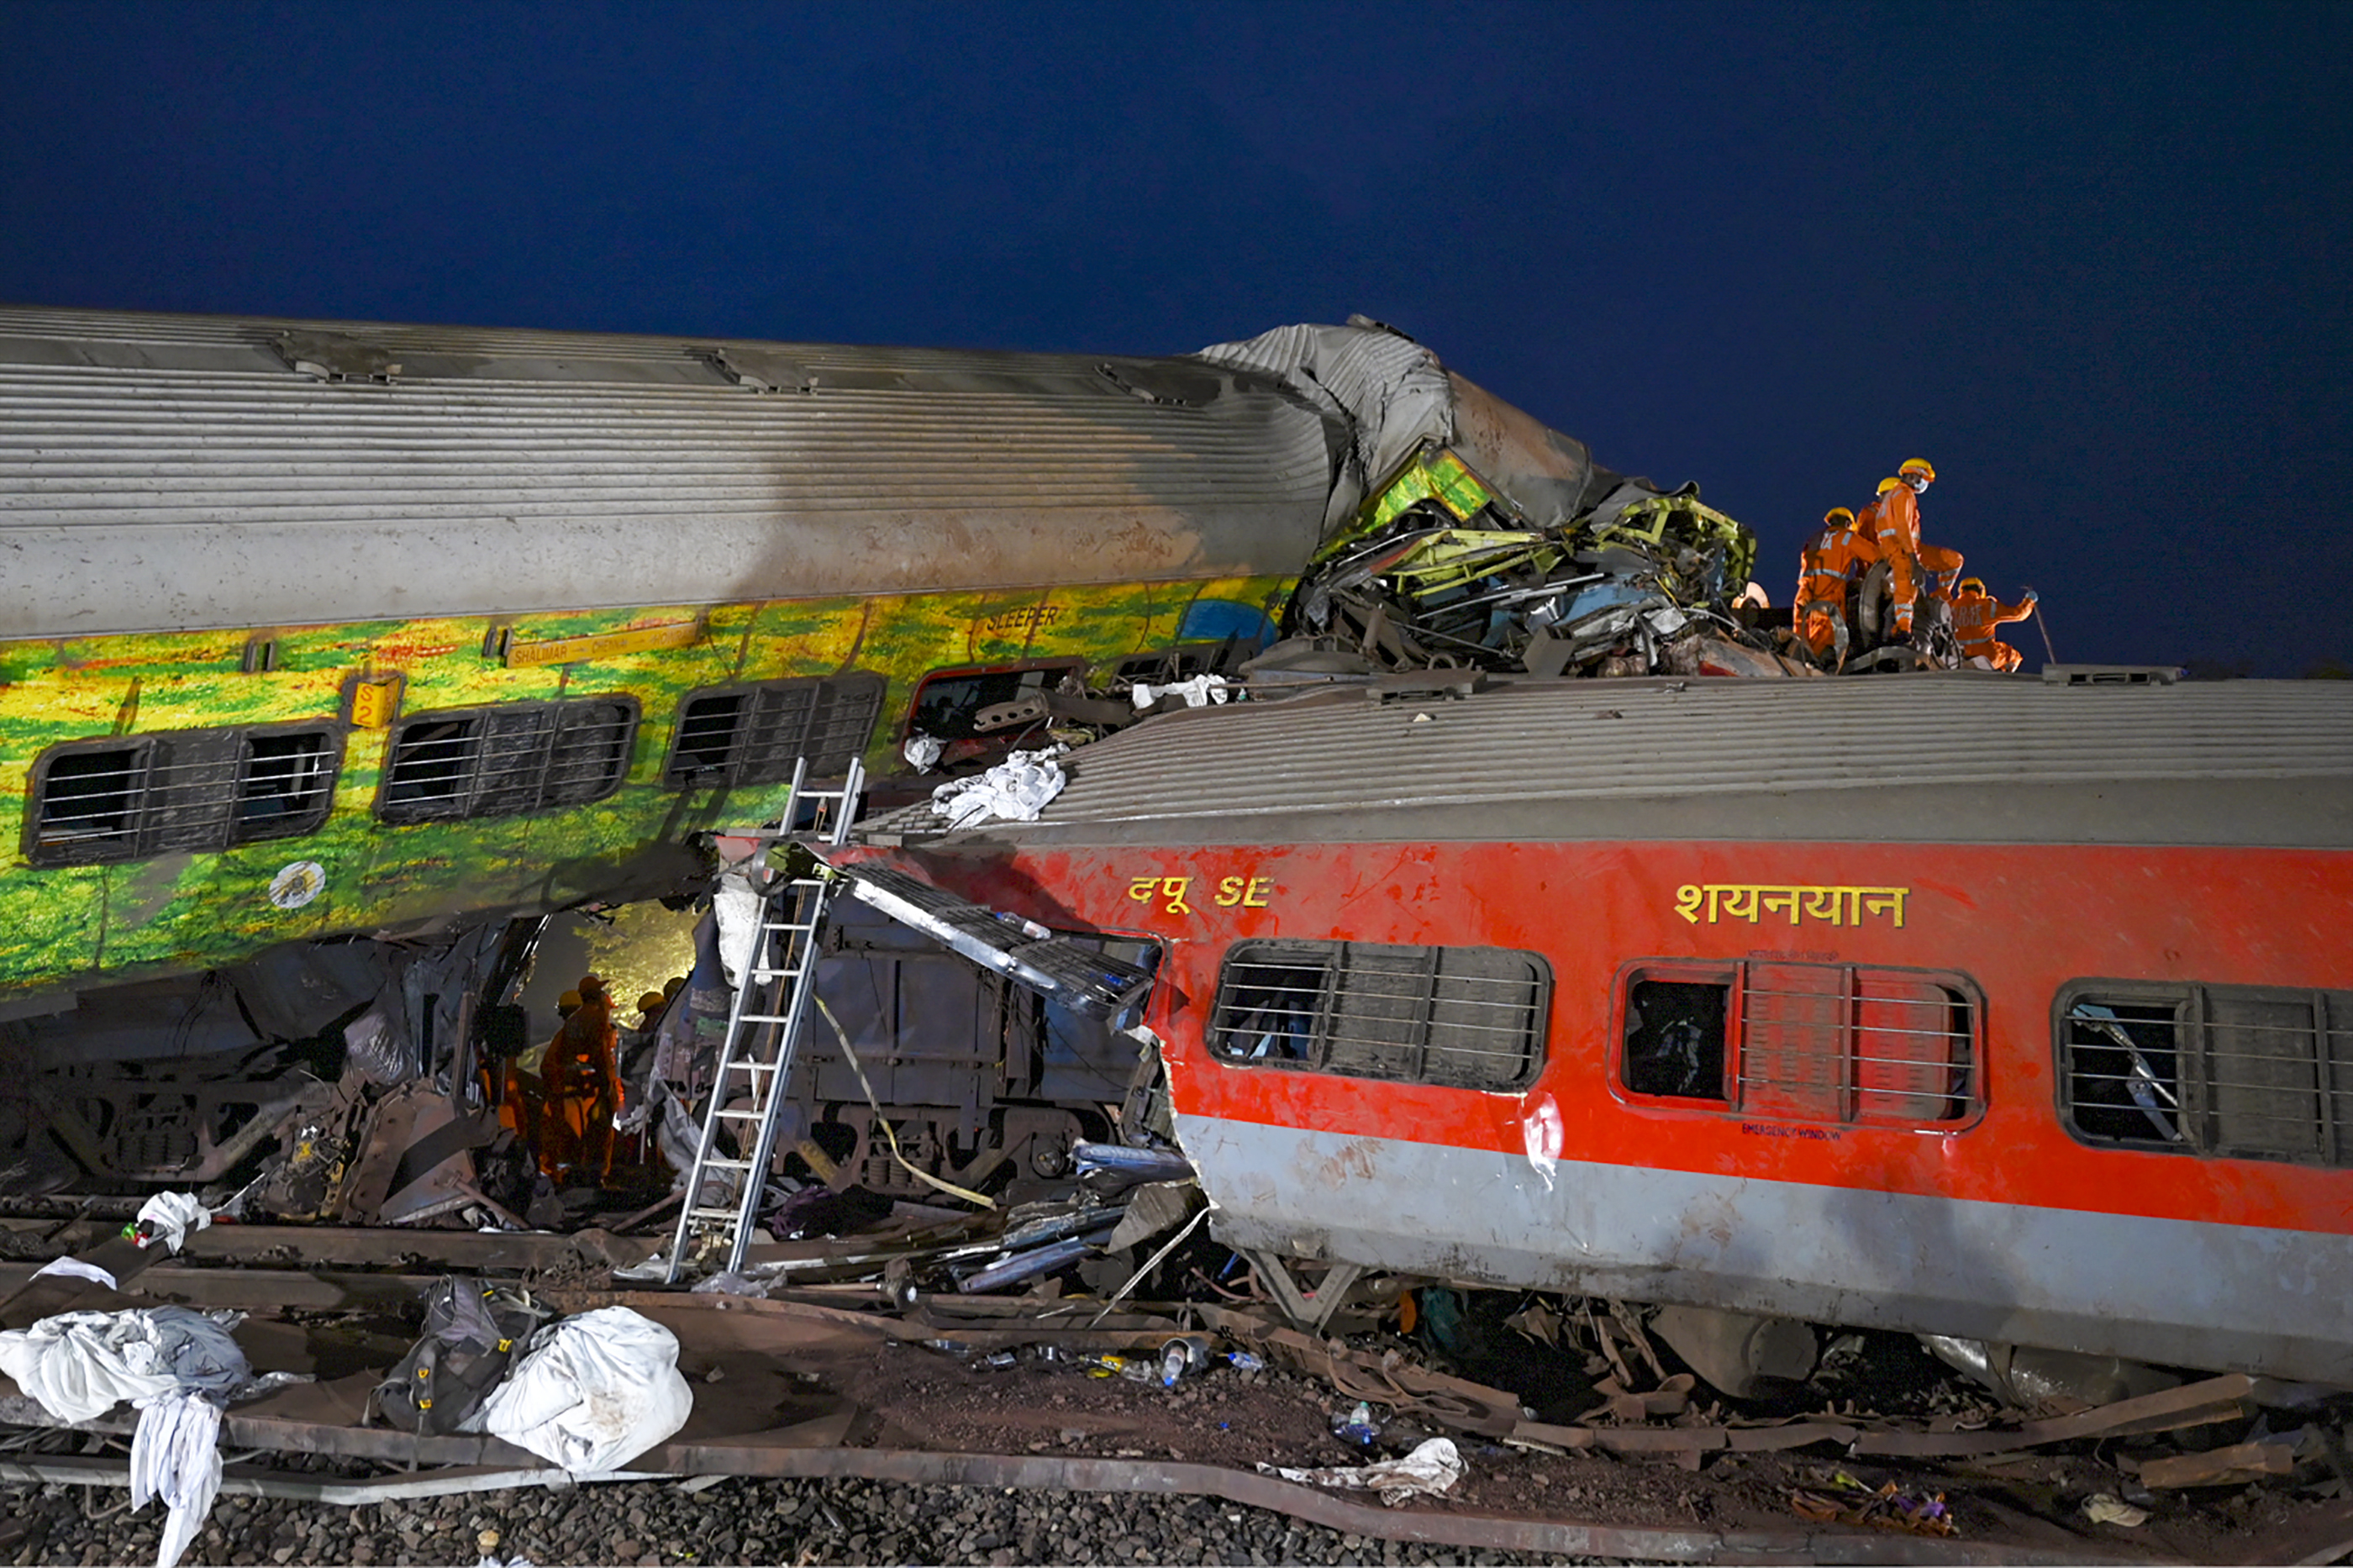 Two train carriages crushed together, one on top of the other, surrounded by debris. A ladder is propped up against the side of the train. Rescue workers in orange jumpsuits and yellow helmets stand on top of the train car. 